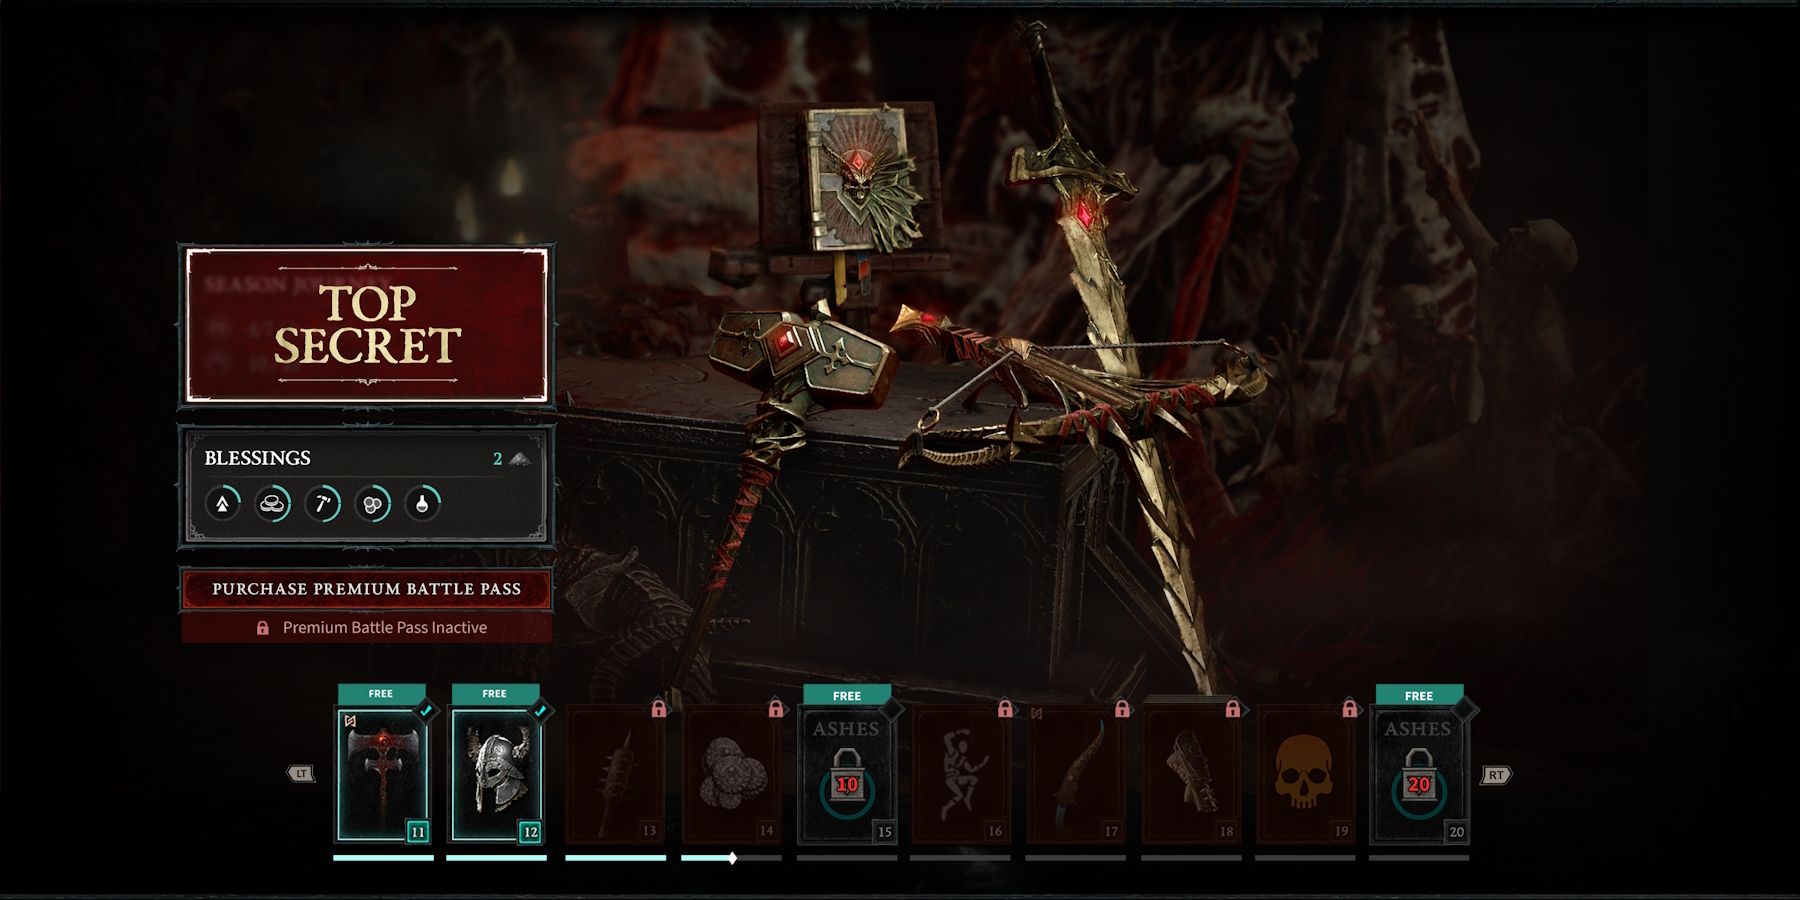 Diablo 4 Battle Pass - image showing an example of some of the items that players can get